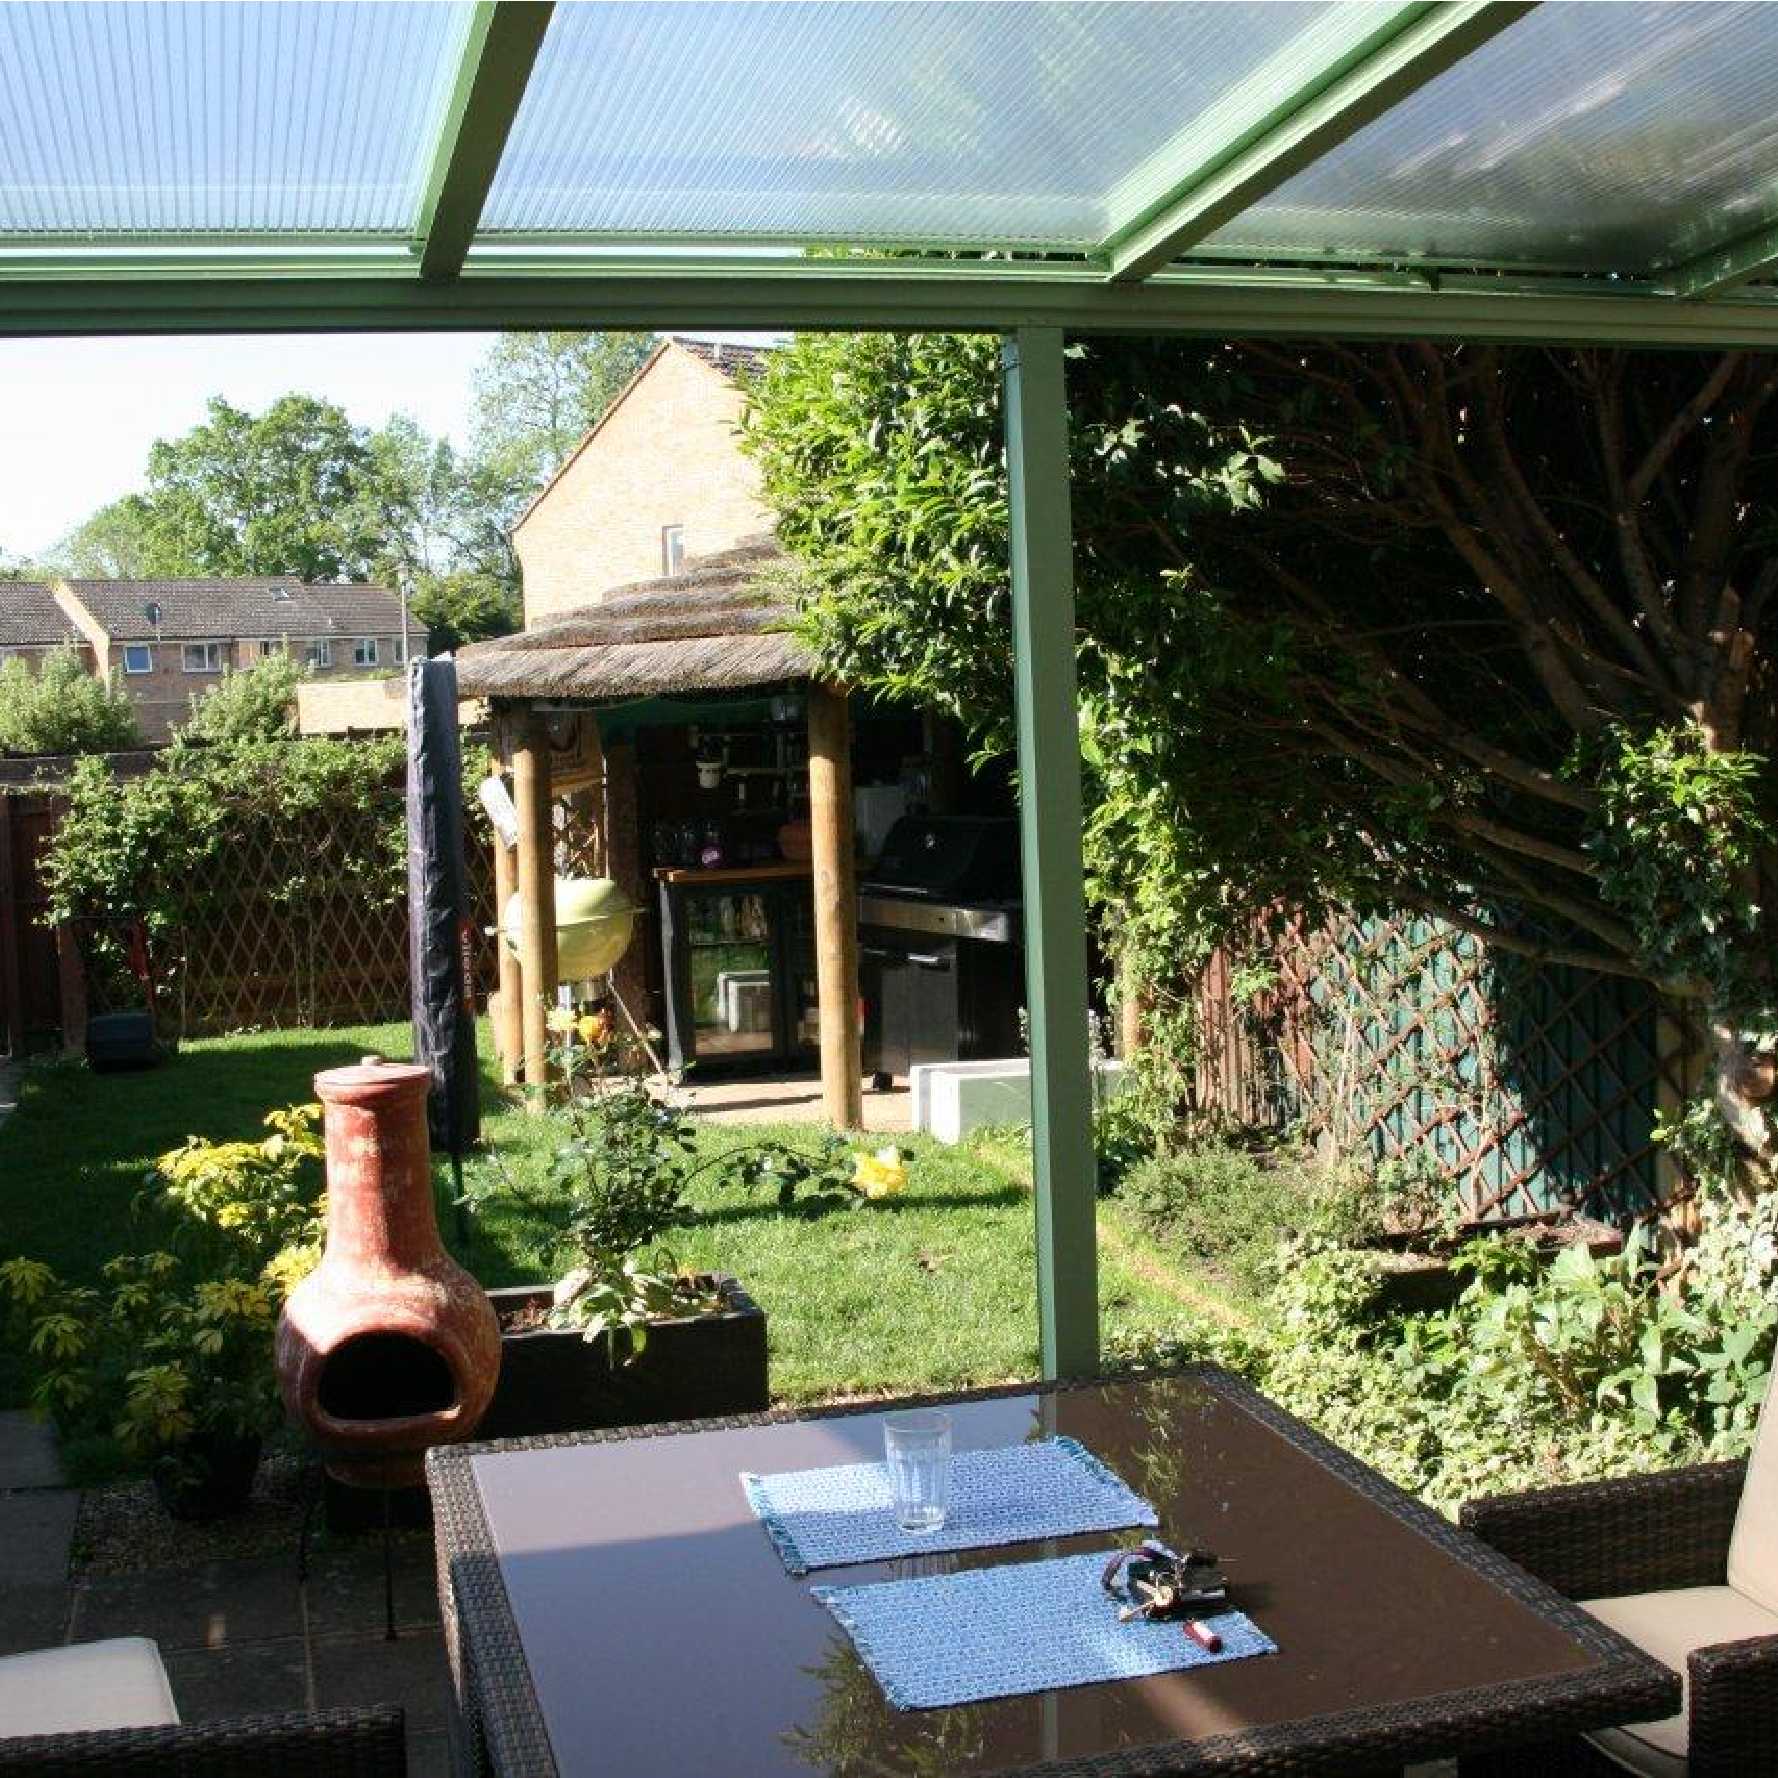 Affordable Omega Smart Lean-To Canopy, White with 16mm Polycarbonate Glazing - 7.4m (W) x 1.5m (P), (4) Supporting Posts